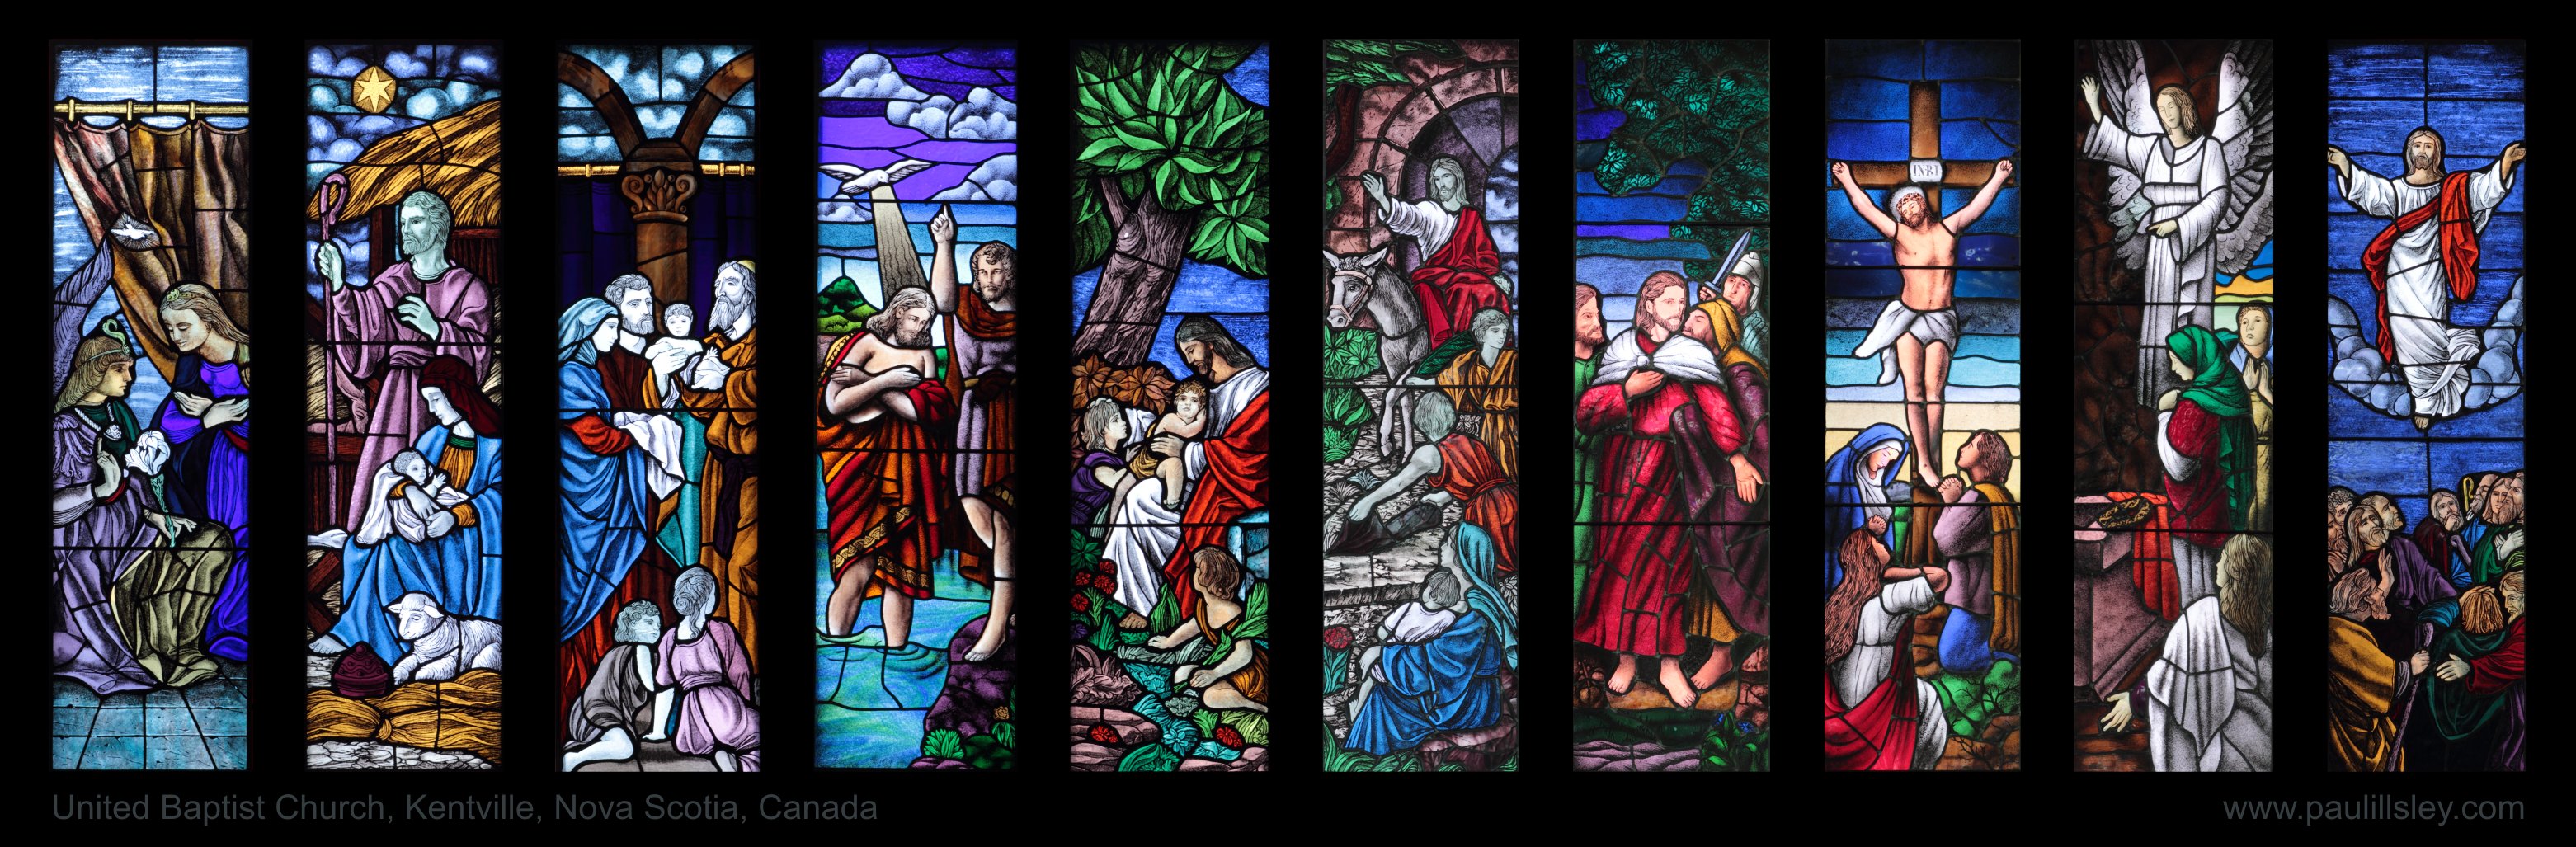 Stained glass art window religion r wallpaper 3123x1027 182568